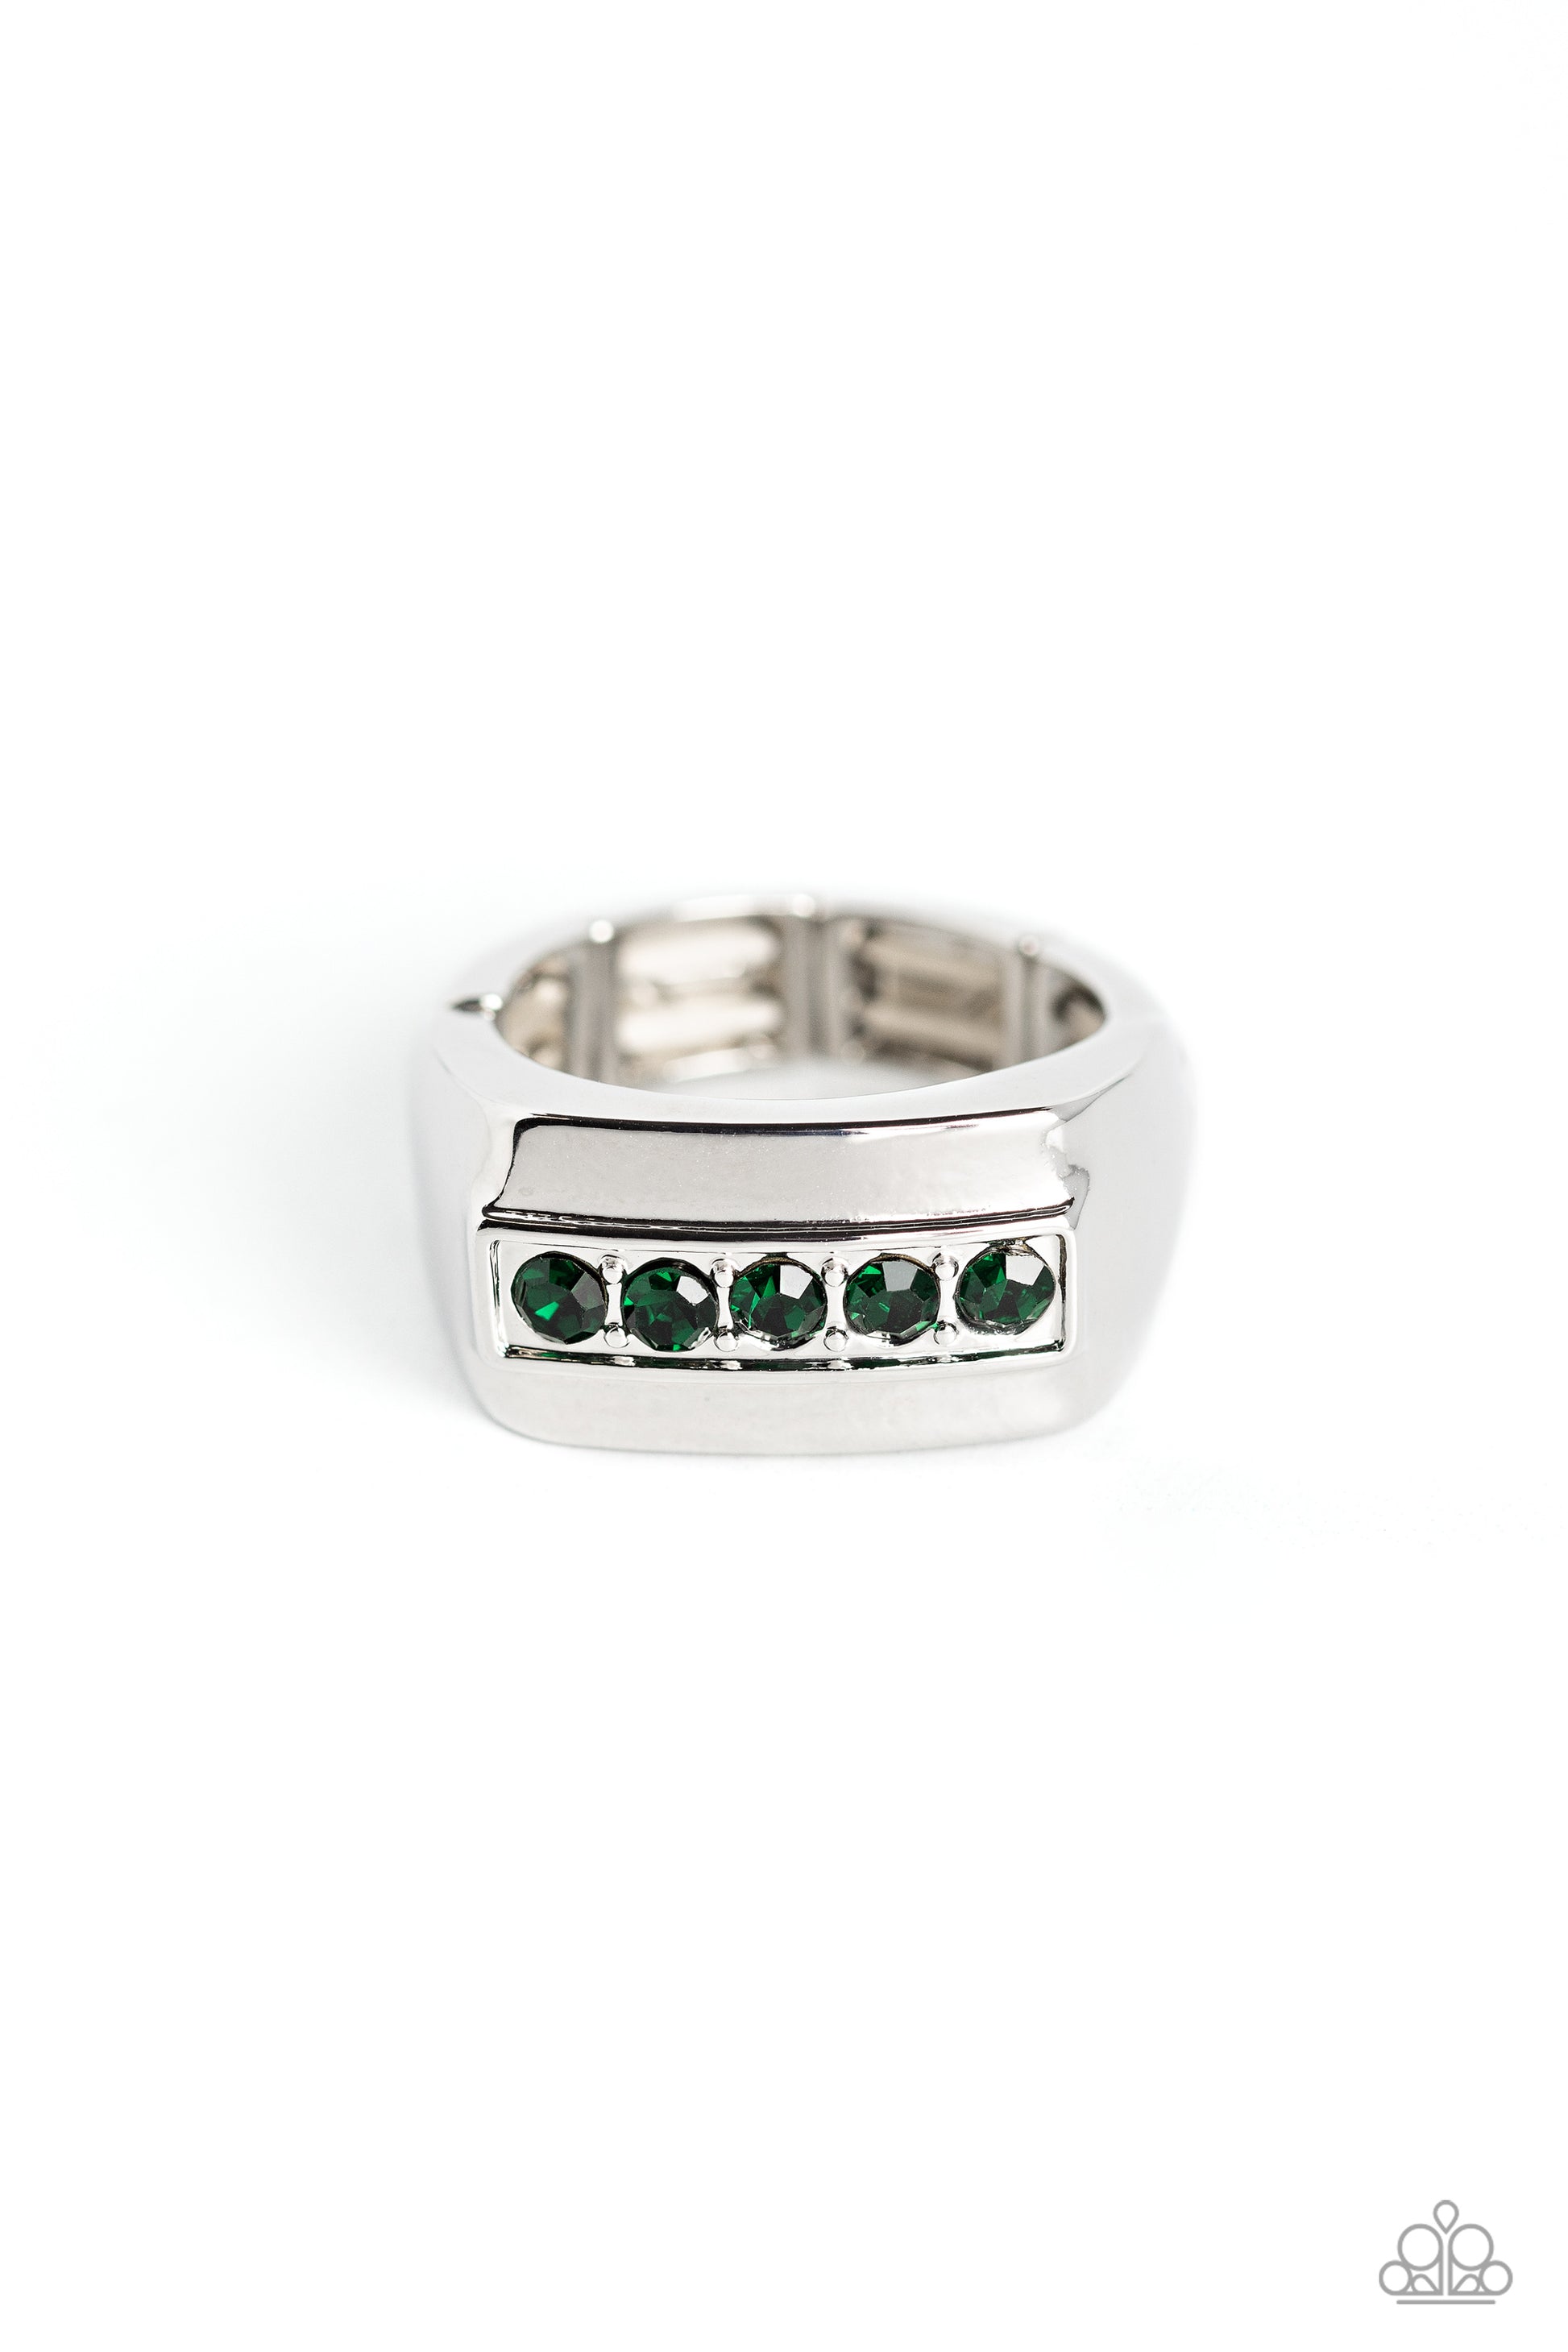 BRAWL For One - green - Paparazzi MENS ring